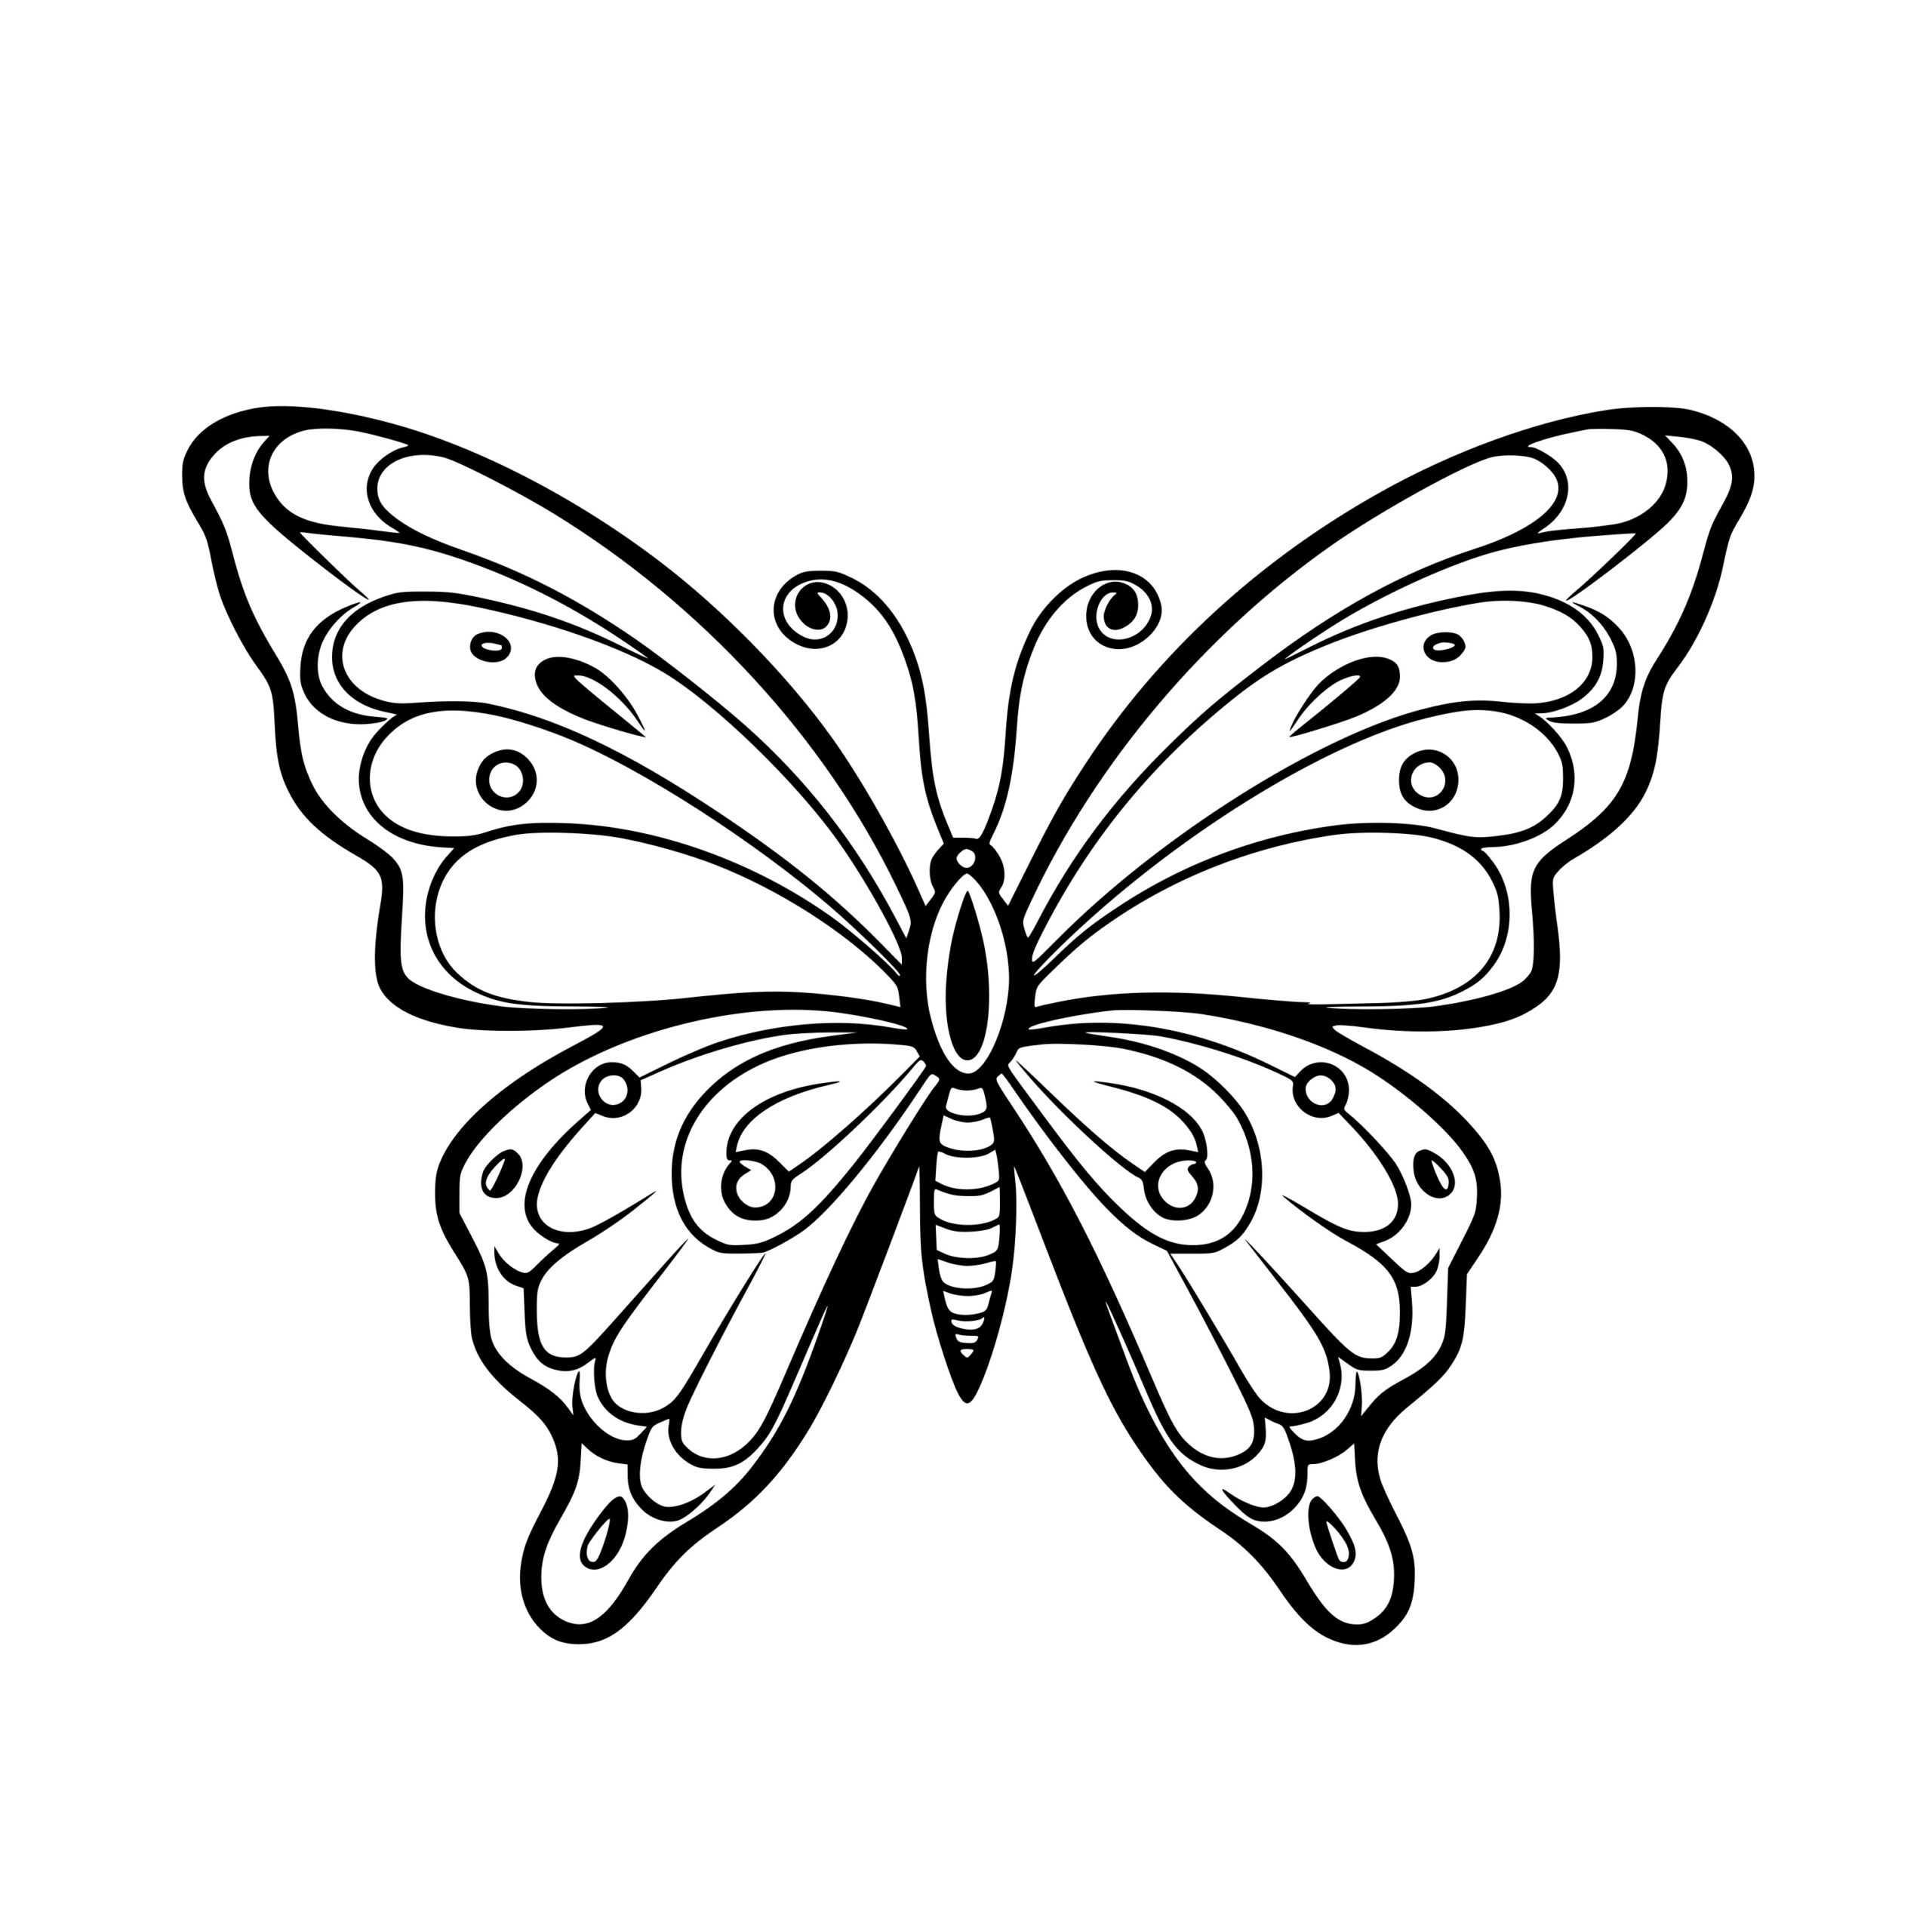 Garden Butterfly: Instant Download Image for Cricut, Silhouette, and ...